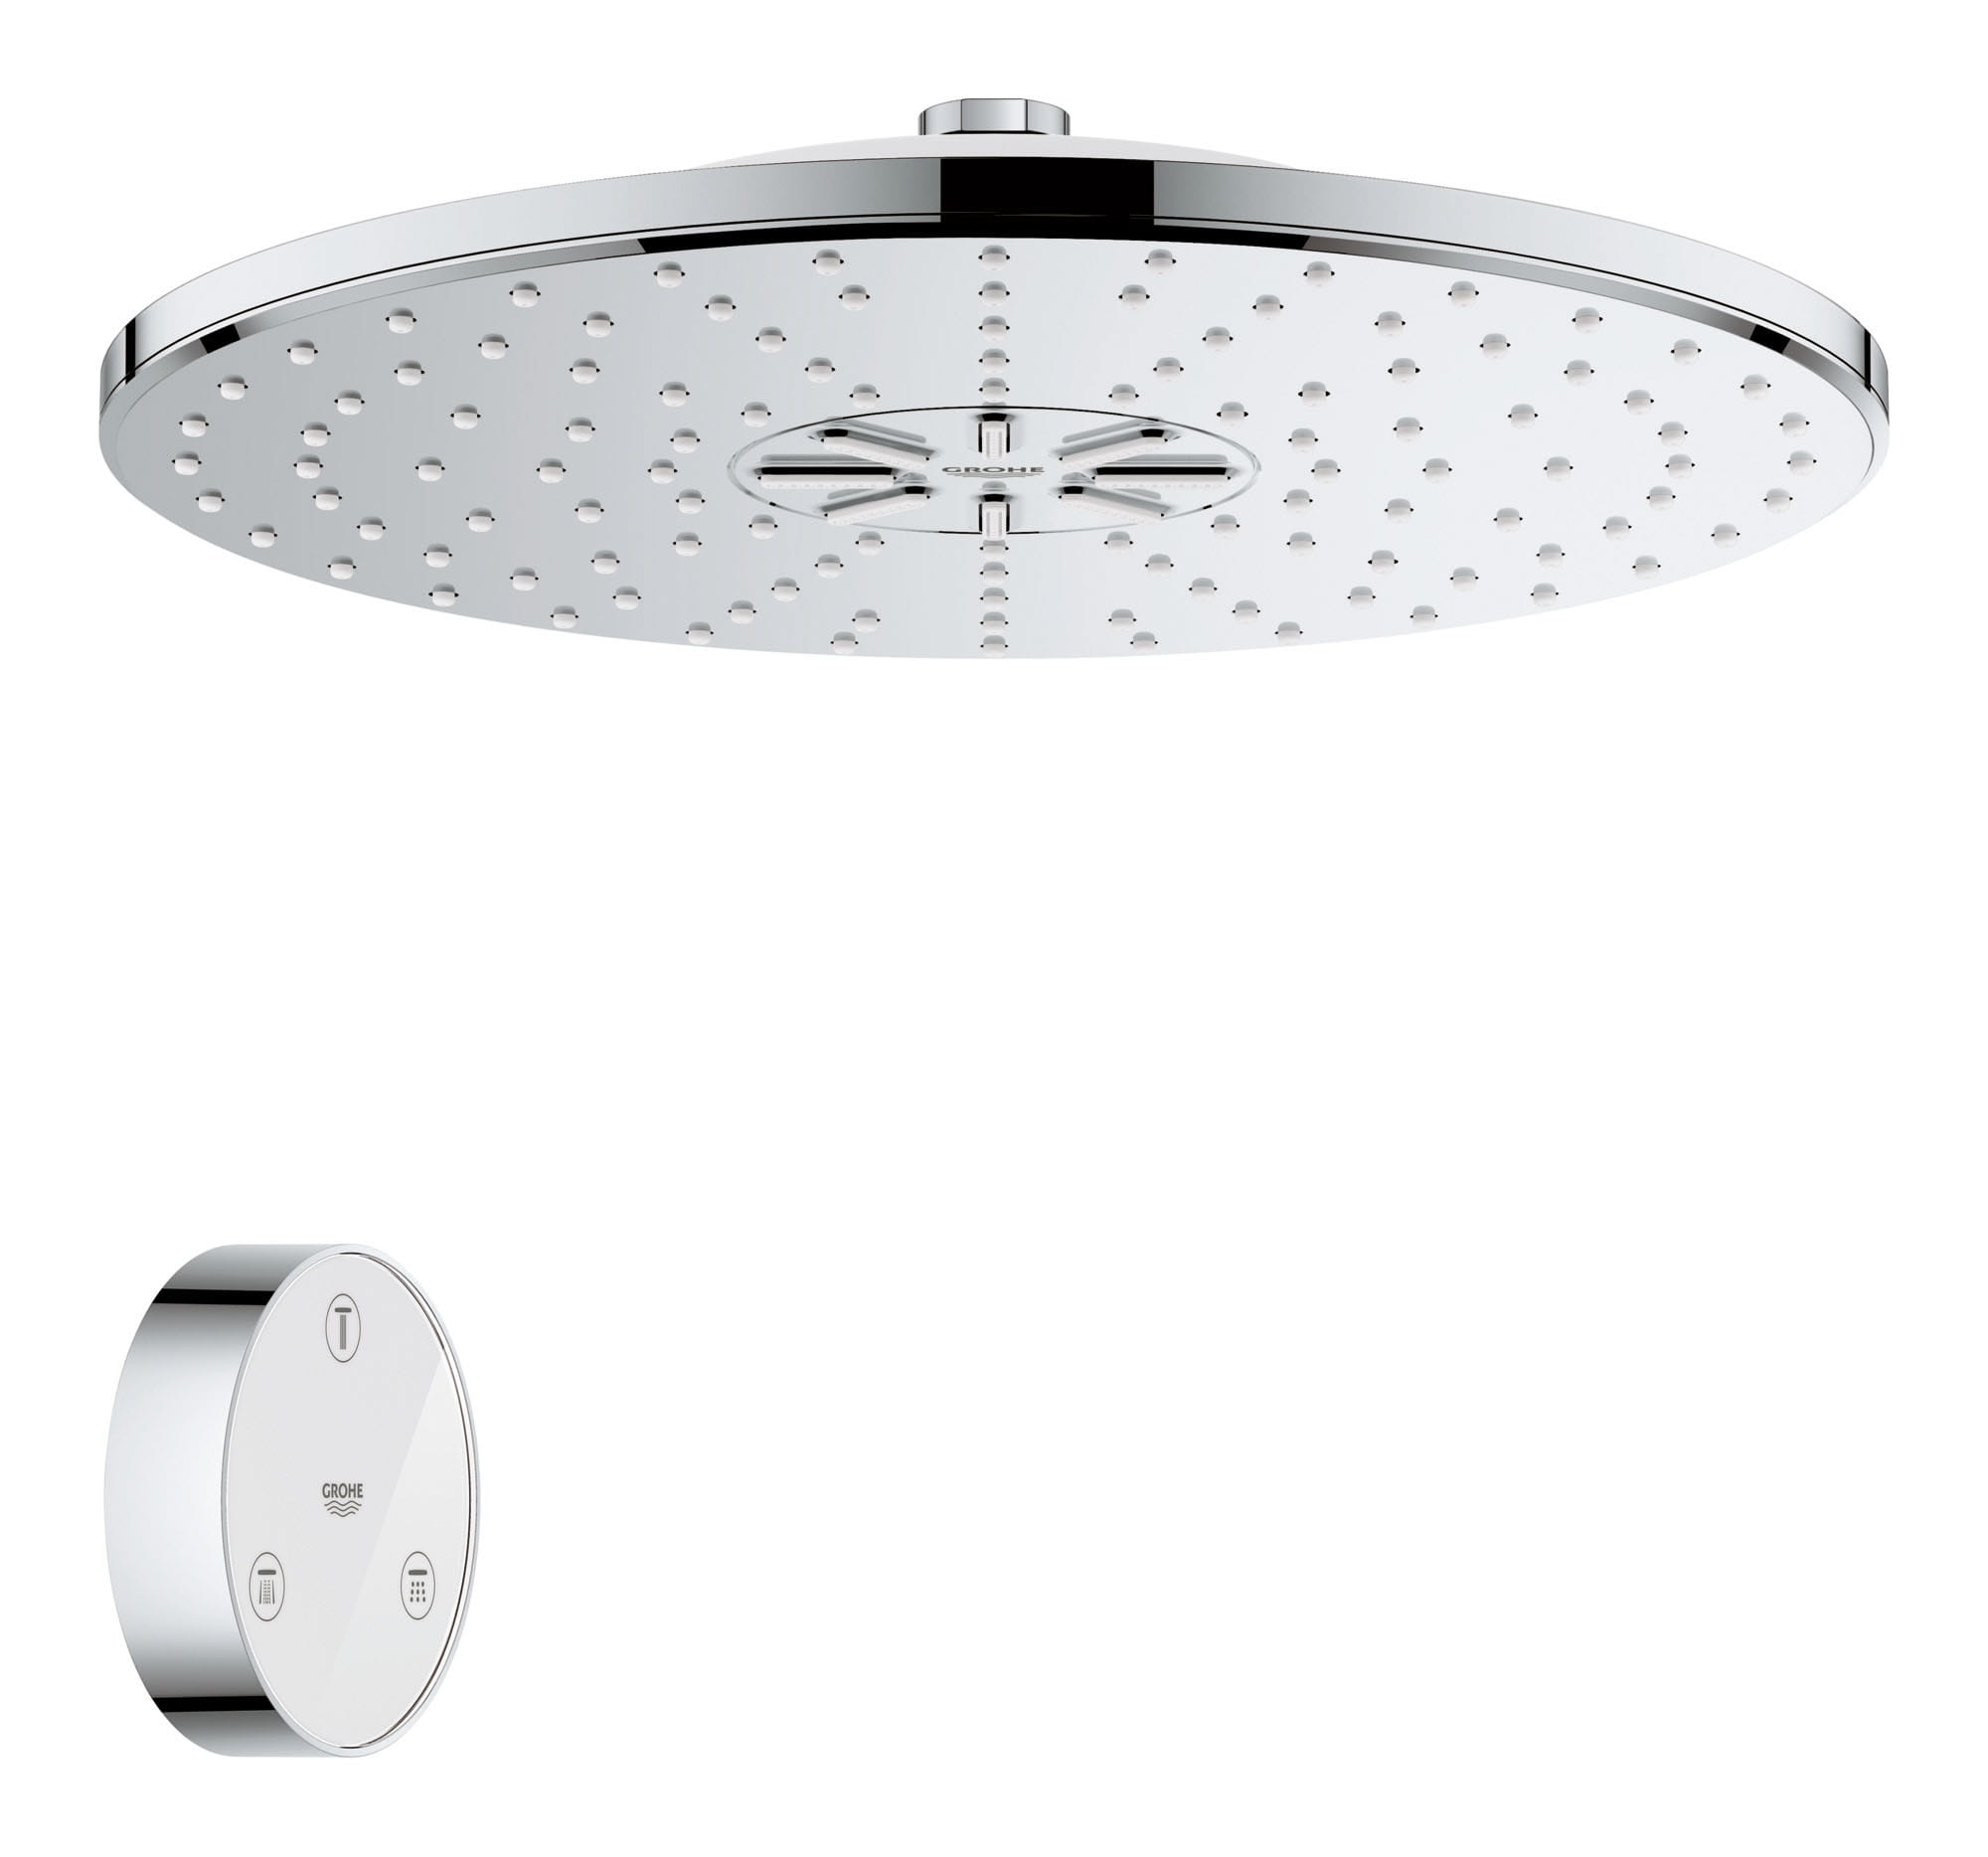 GROHE 26644000 12 INCH RAINSHOWER 310 SMARTCONNECT ROUND SHOWER HEAD WITH REMOTE , TWO SPRAYS - CHROME